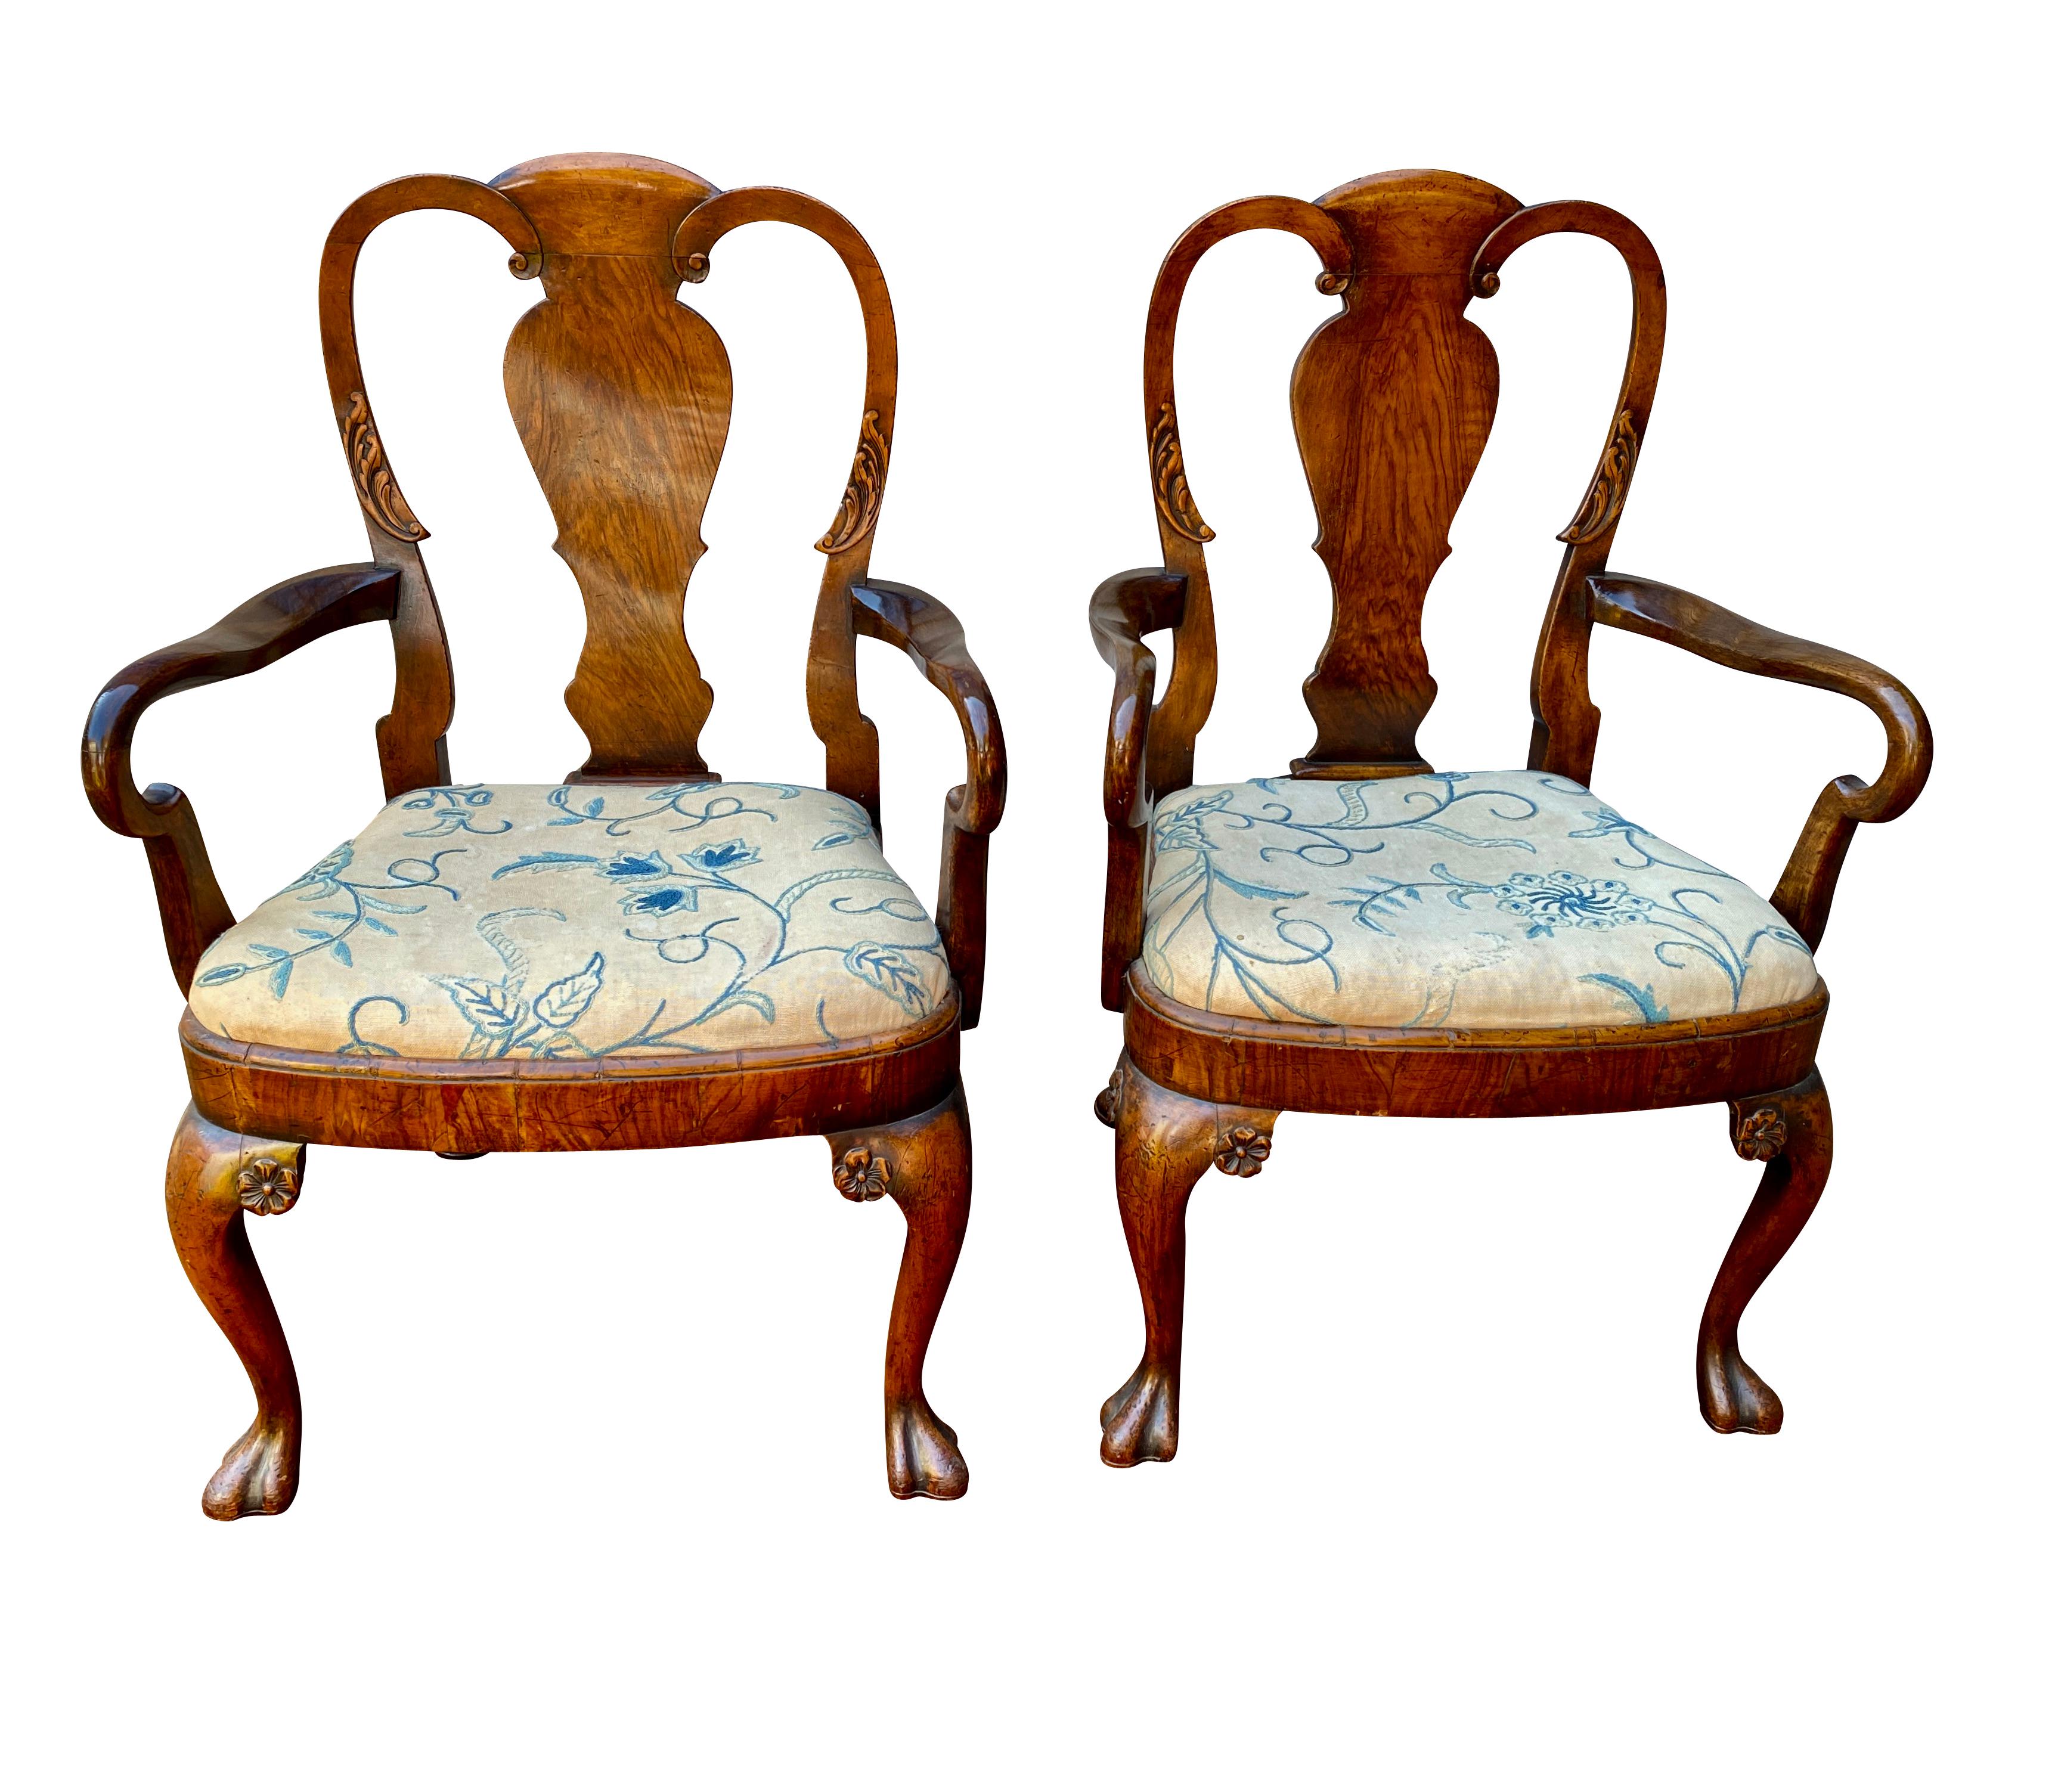 Each with an arched crestrail and vase form splat, crook form arms and bowed seat with drop in upholstered seats raised on cabriole legs with trifid feet.